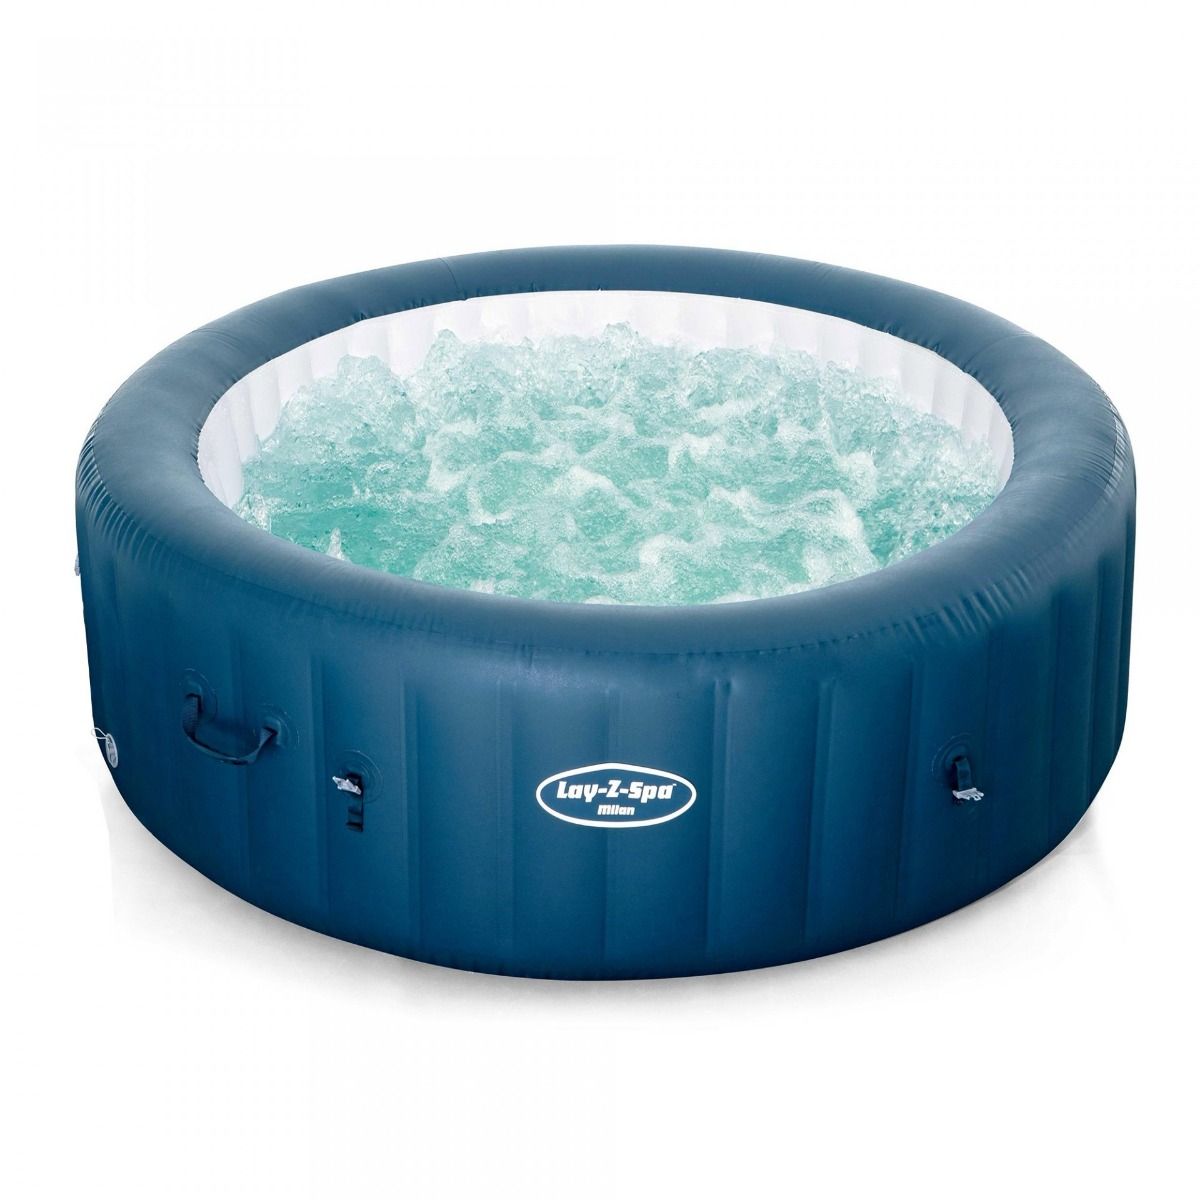 Tub Bestway 2021 Bestway Lay Z Spa Milan Liner NO HEATER OR COVERS NEW LAZY Body 